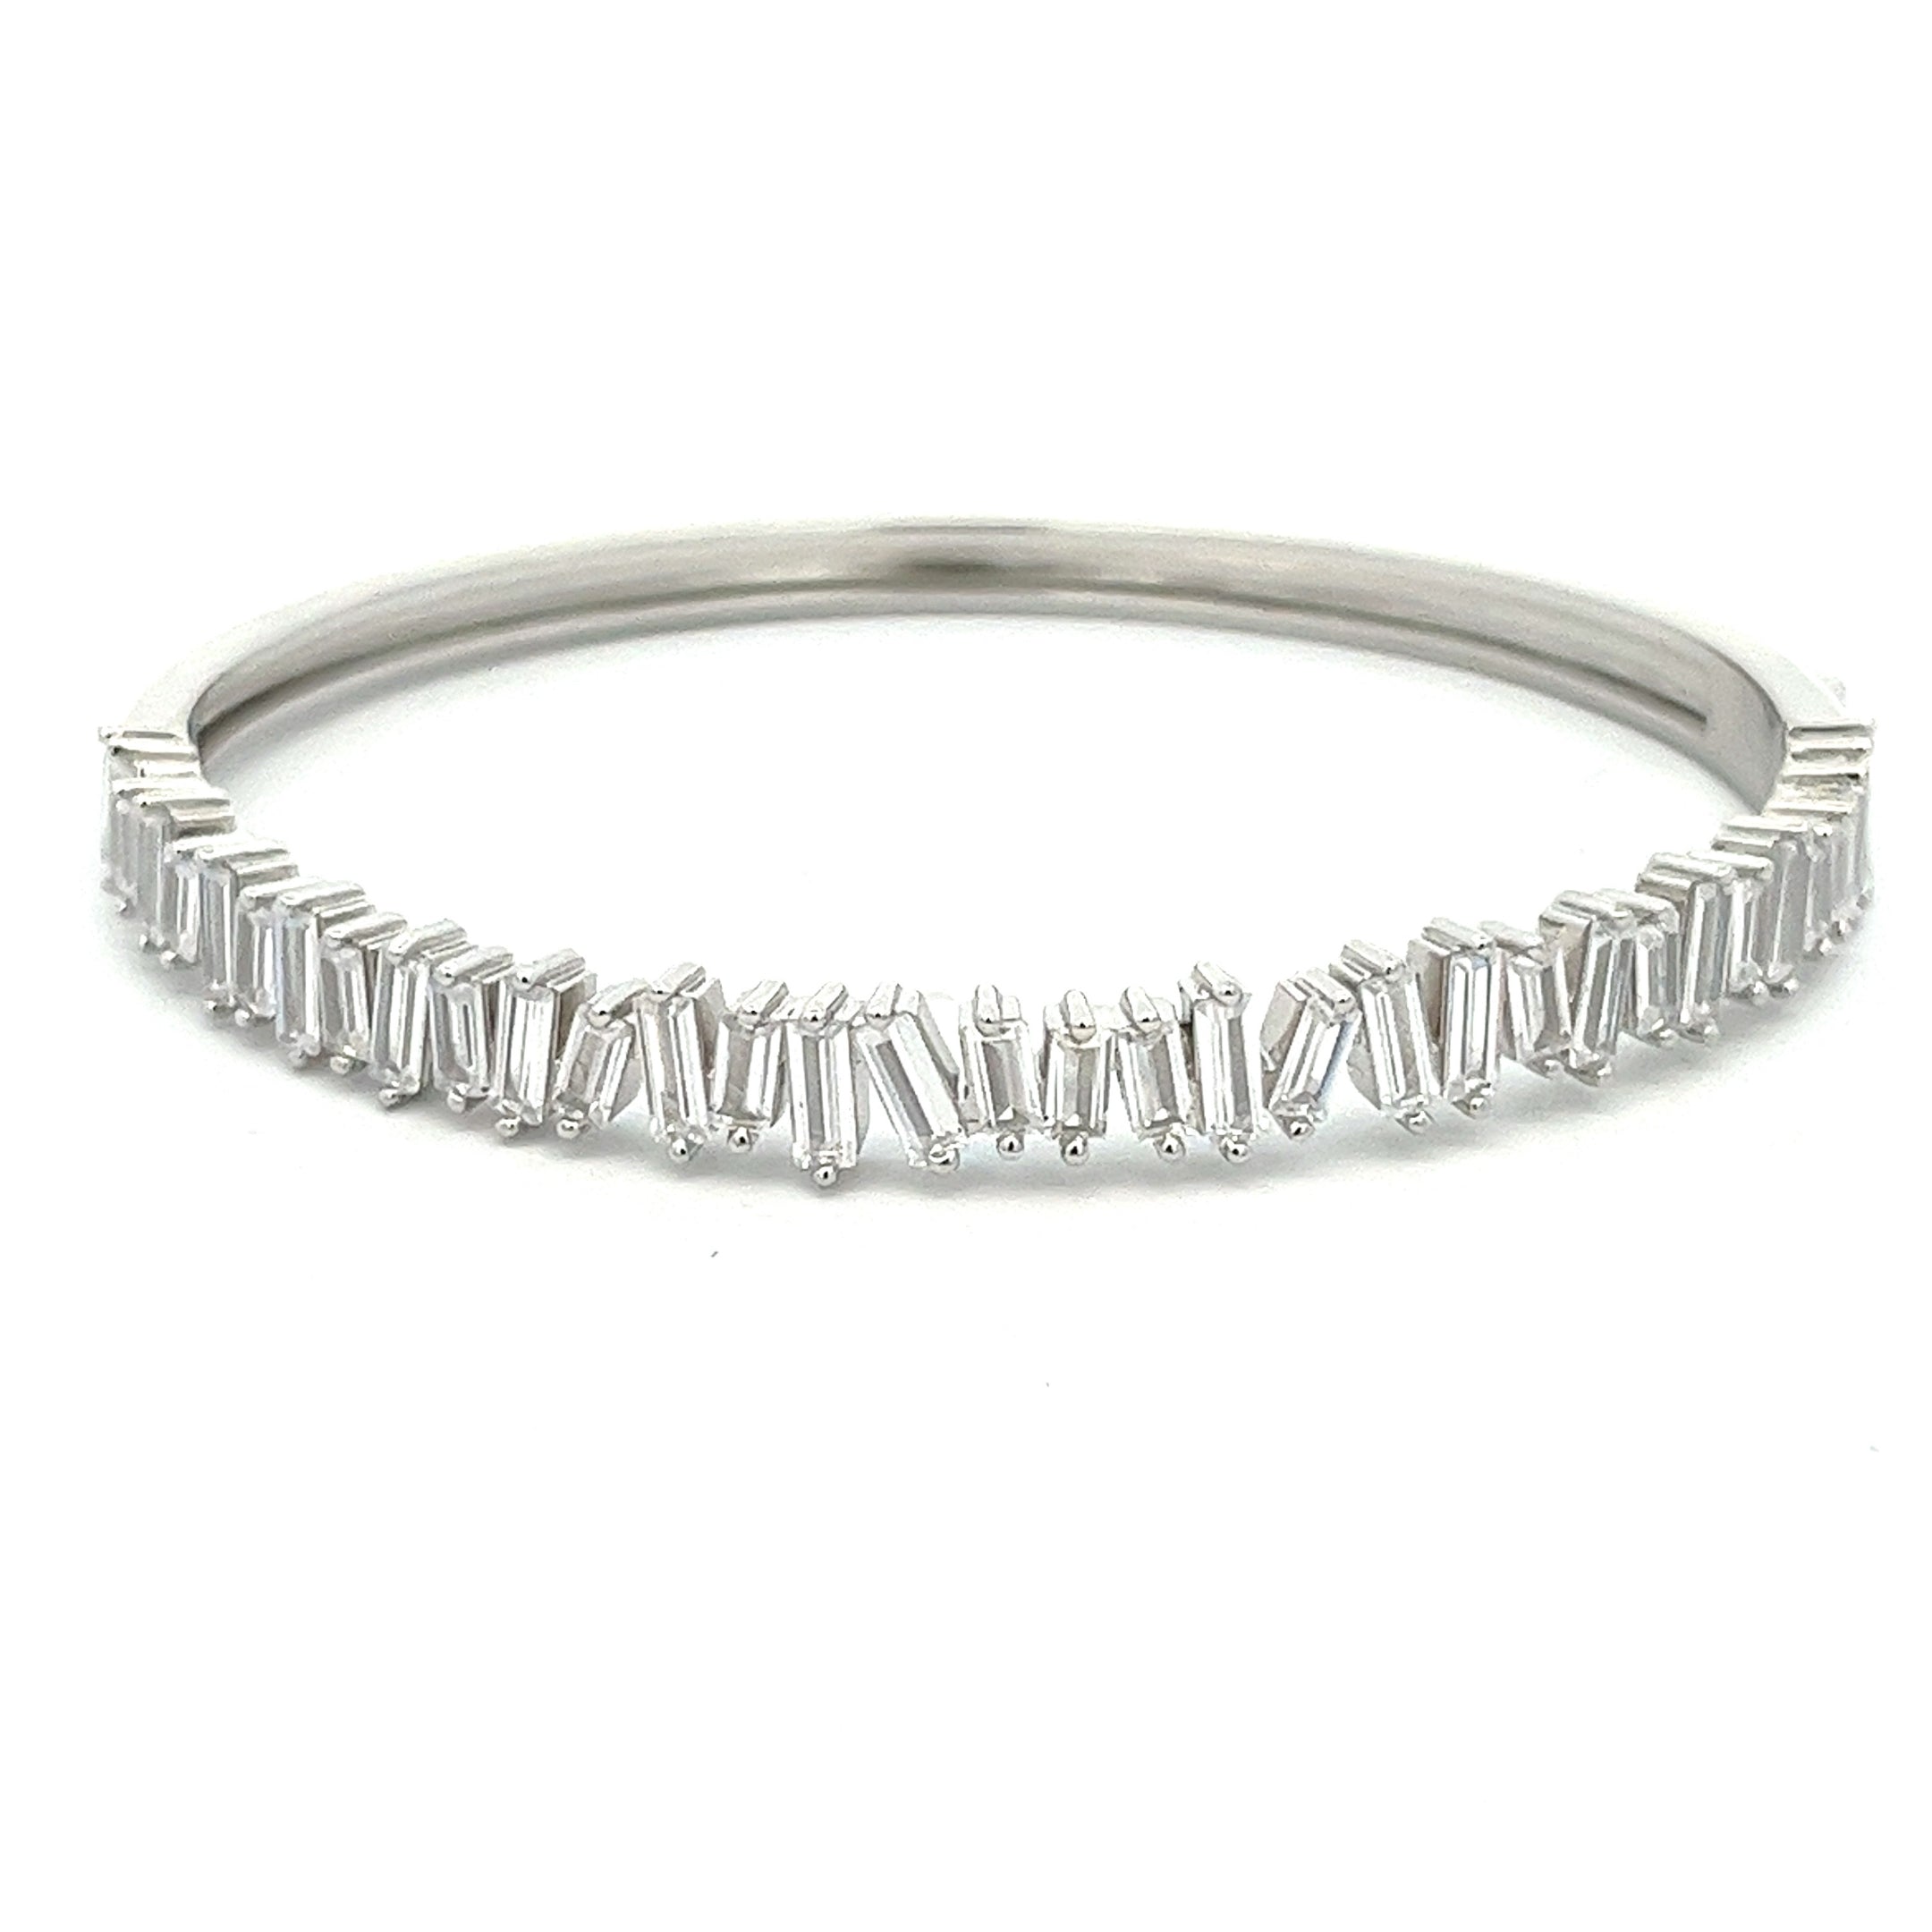 925 SILVER BRACELET WITH CRYSTALS